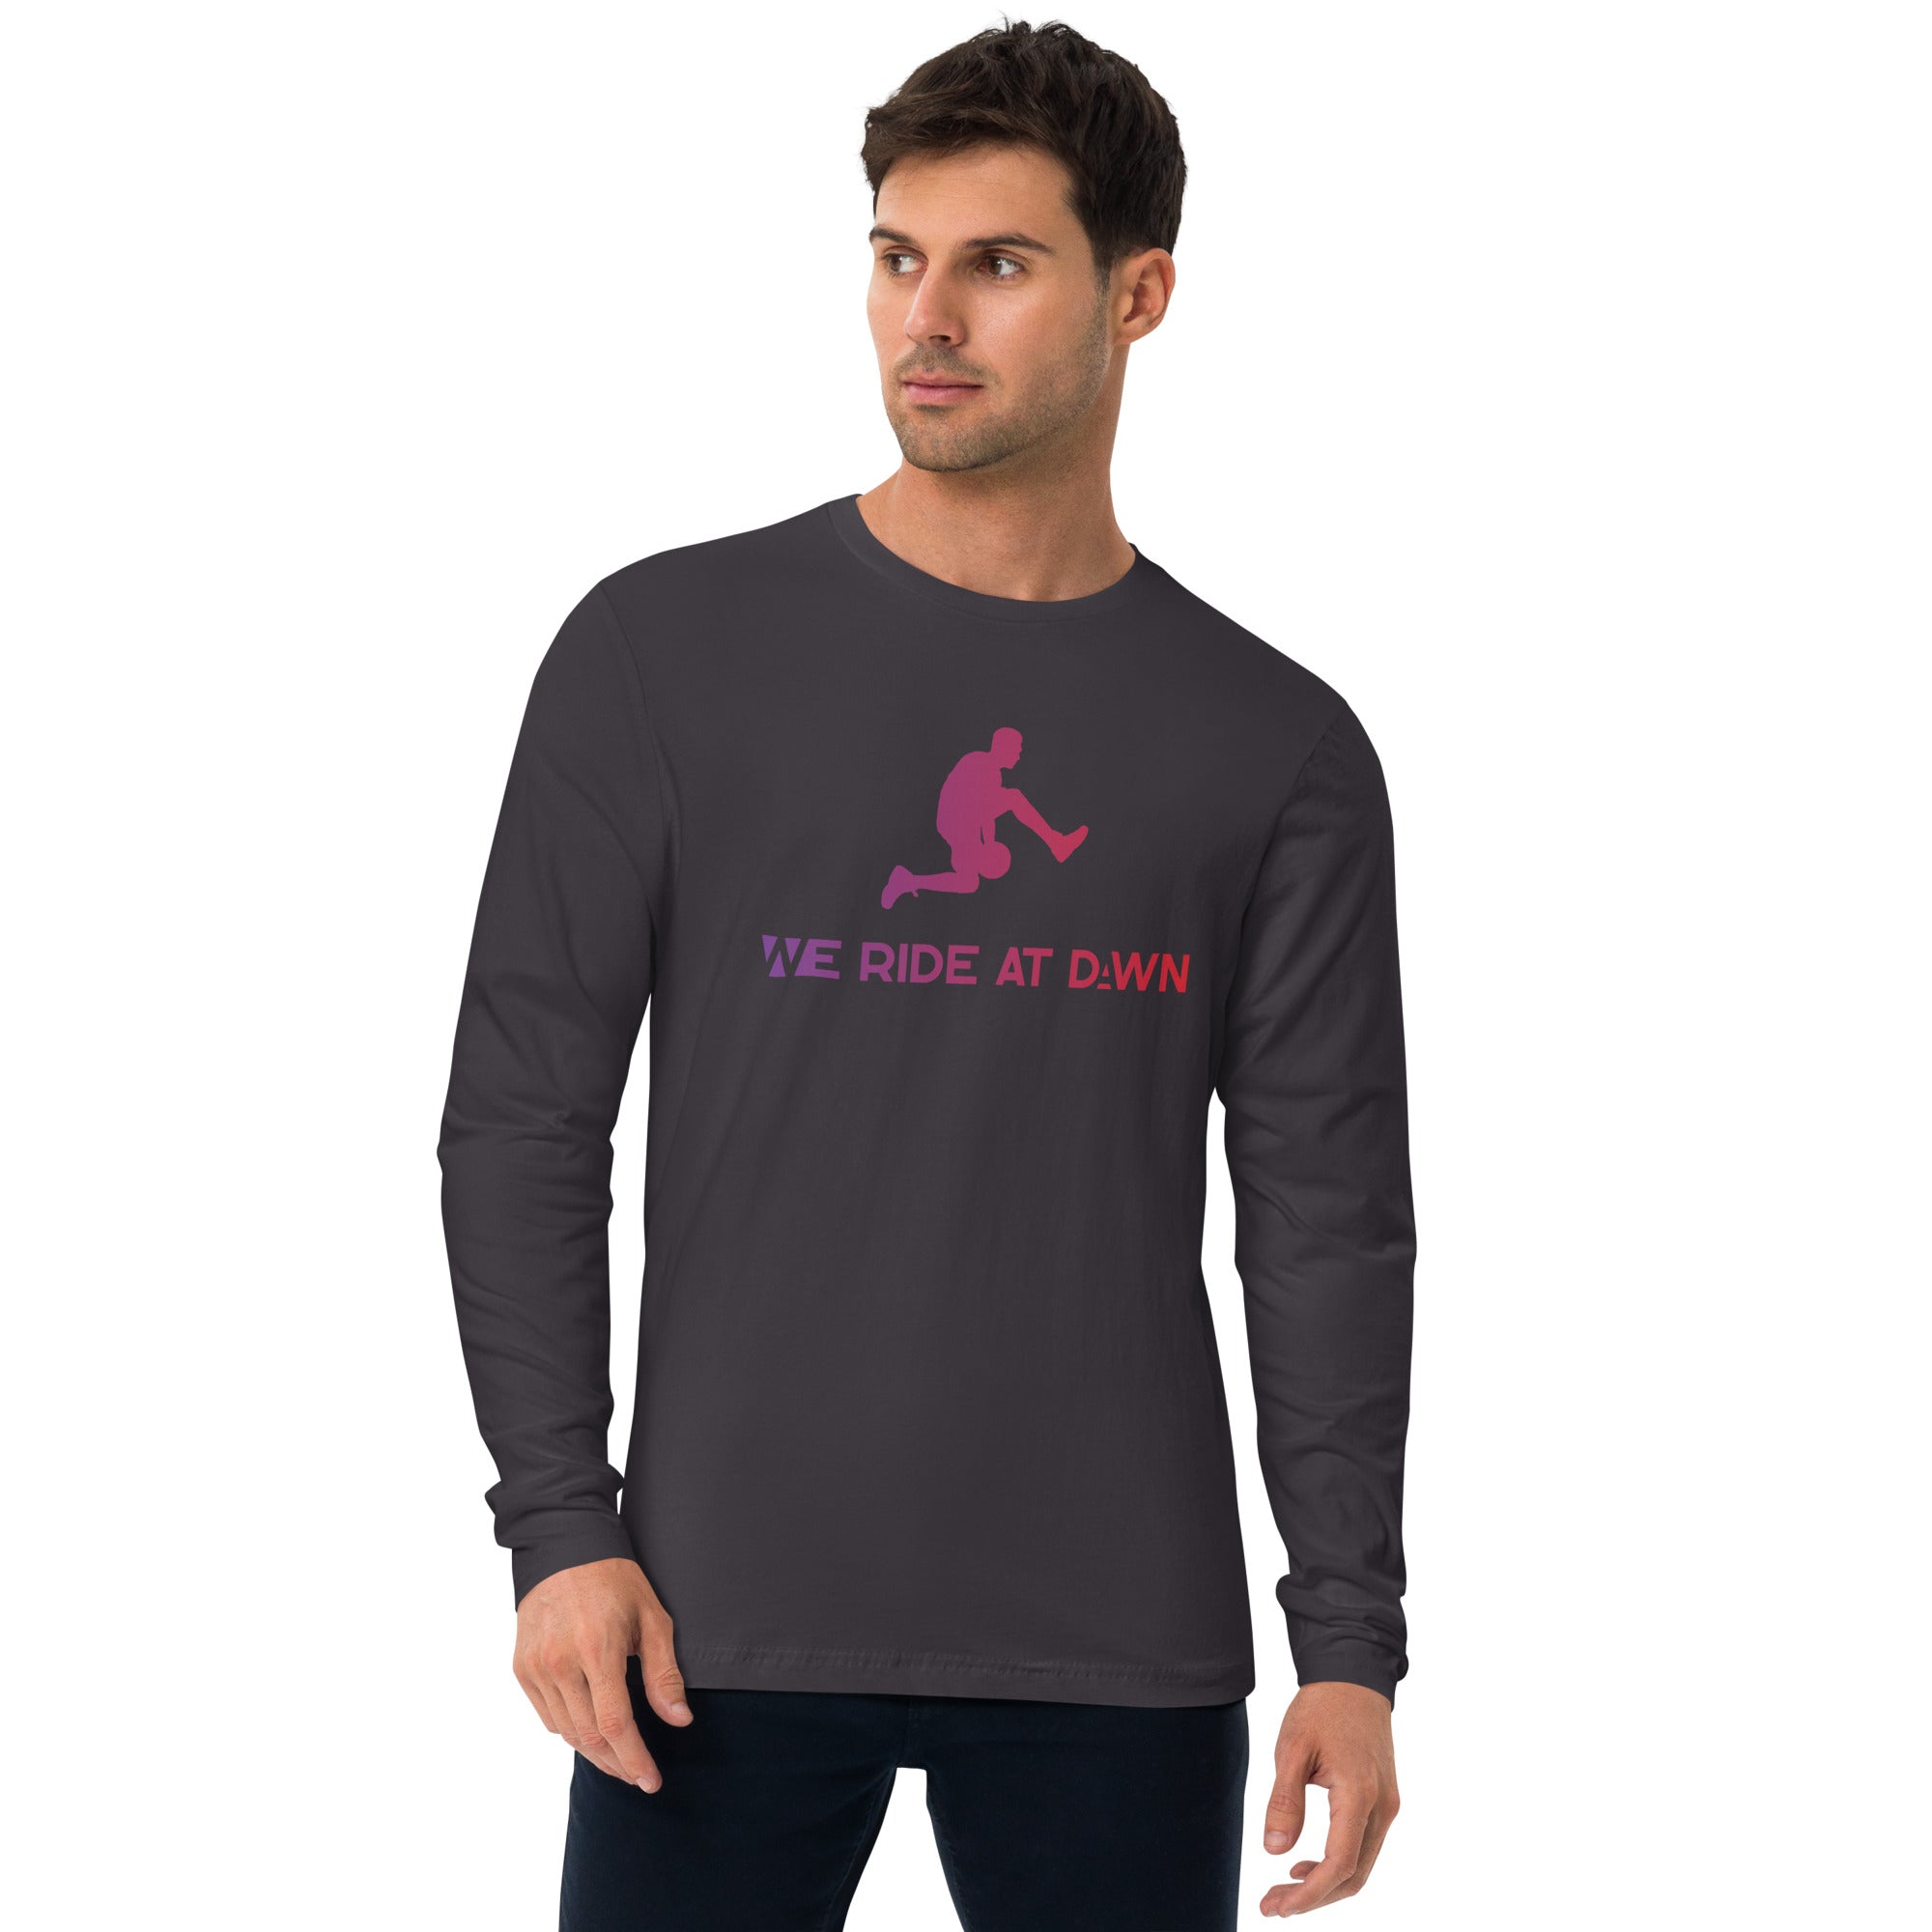 We Ride at Dawn Long Sleeve Fitted Crew